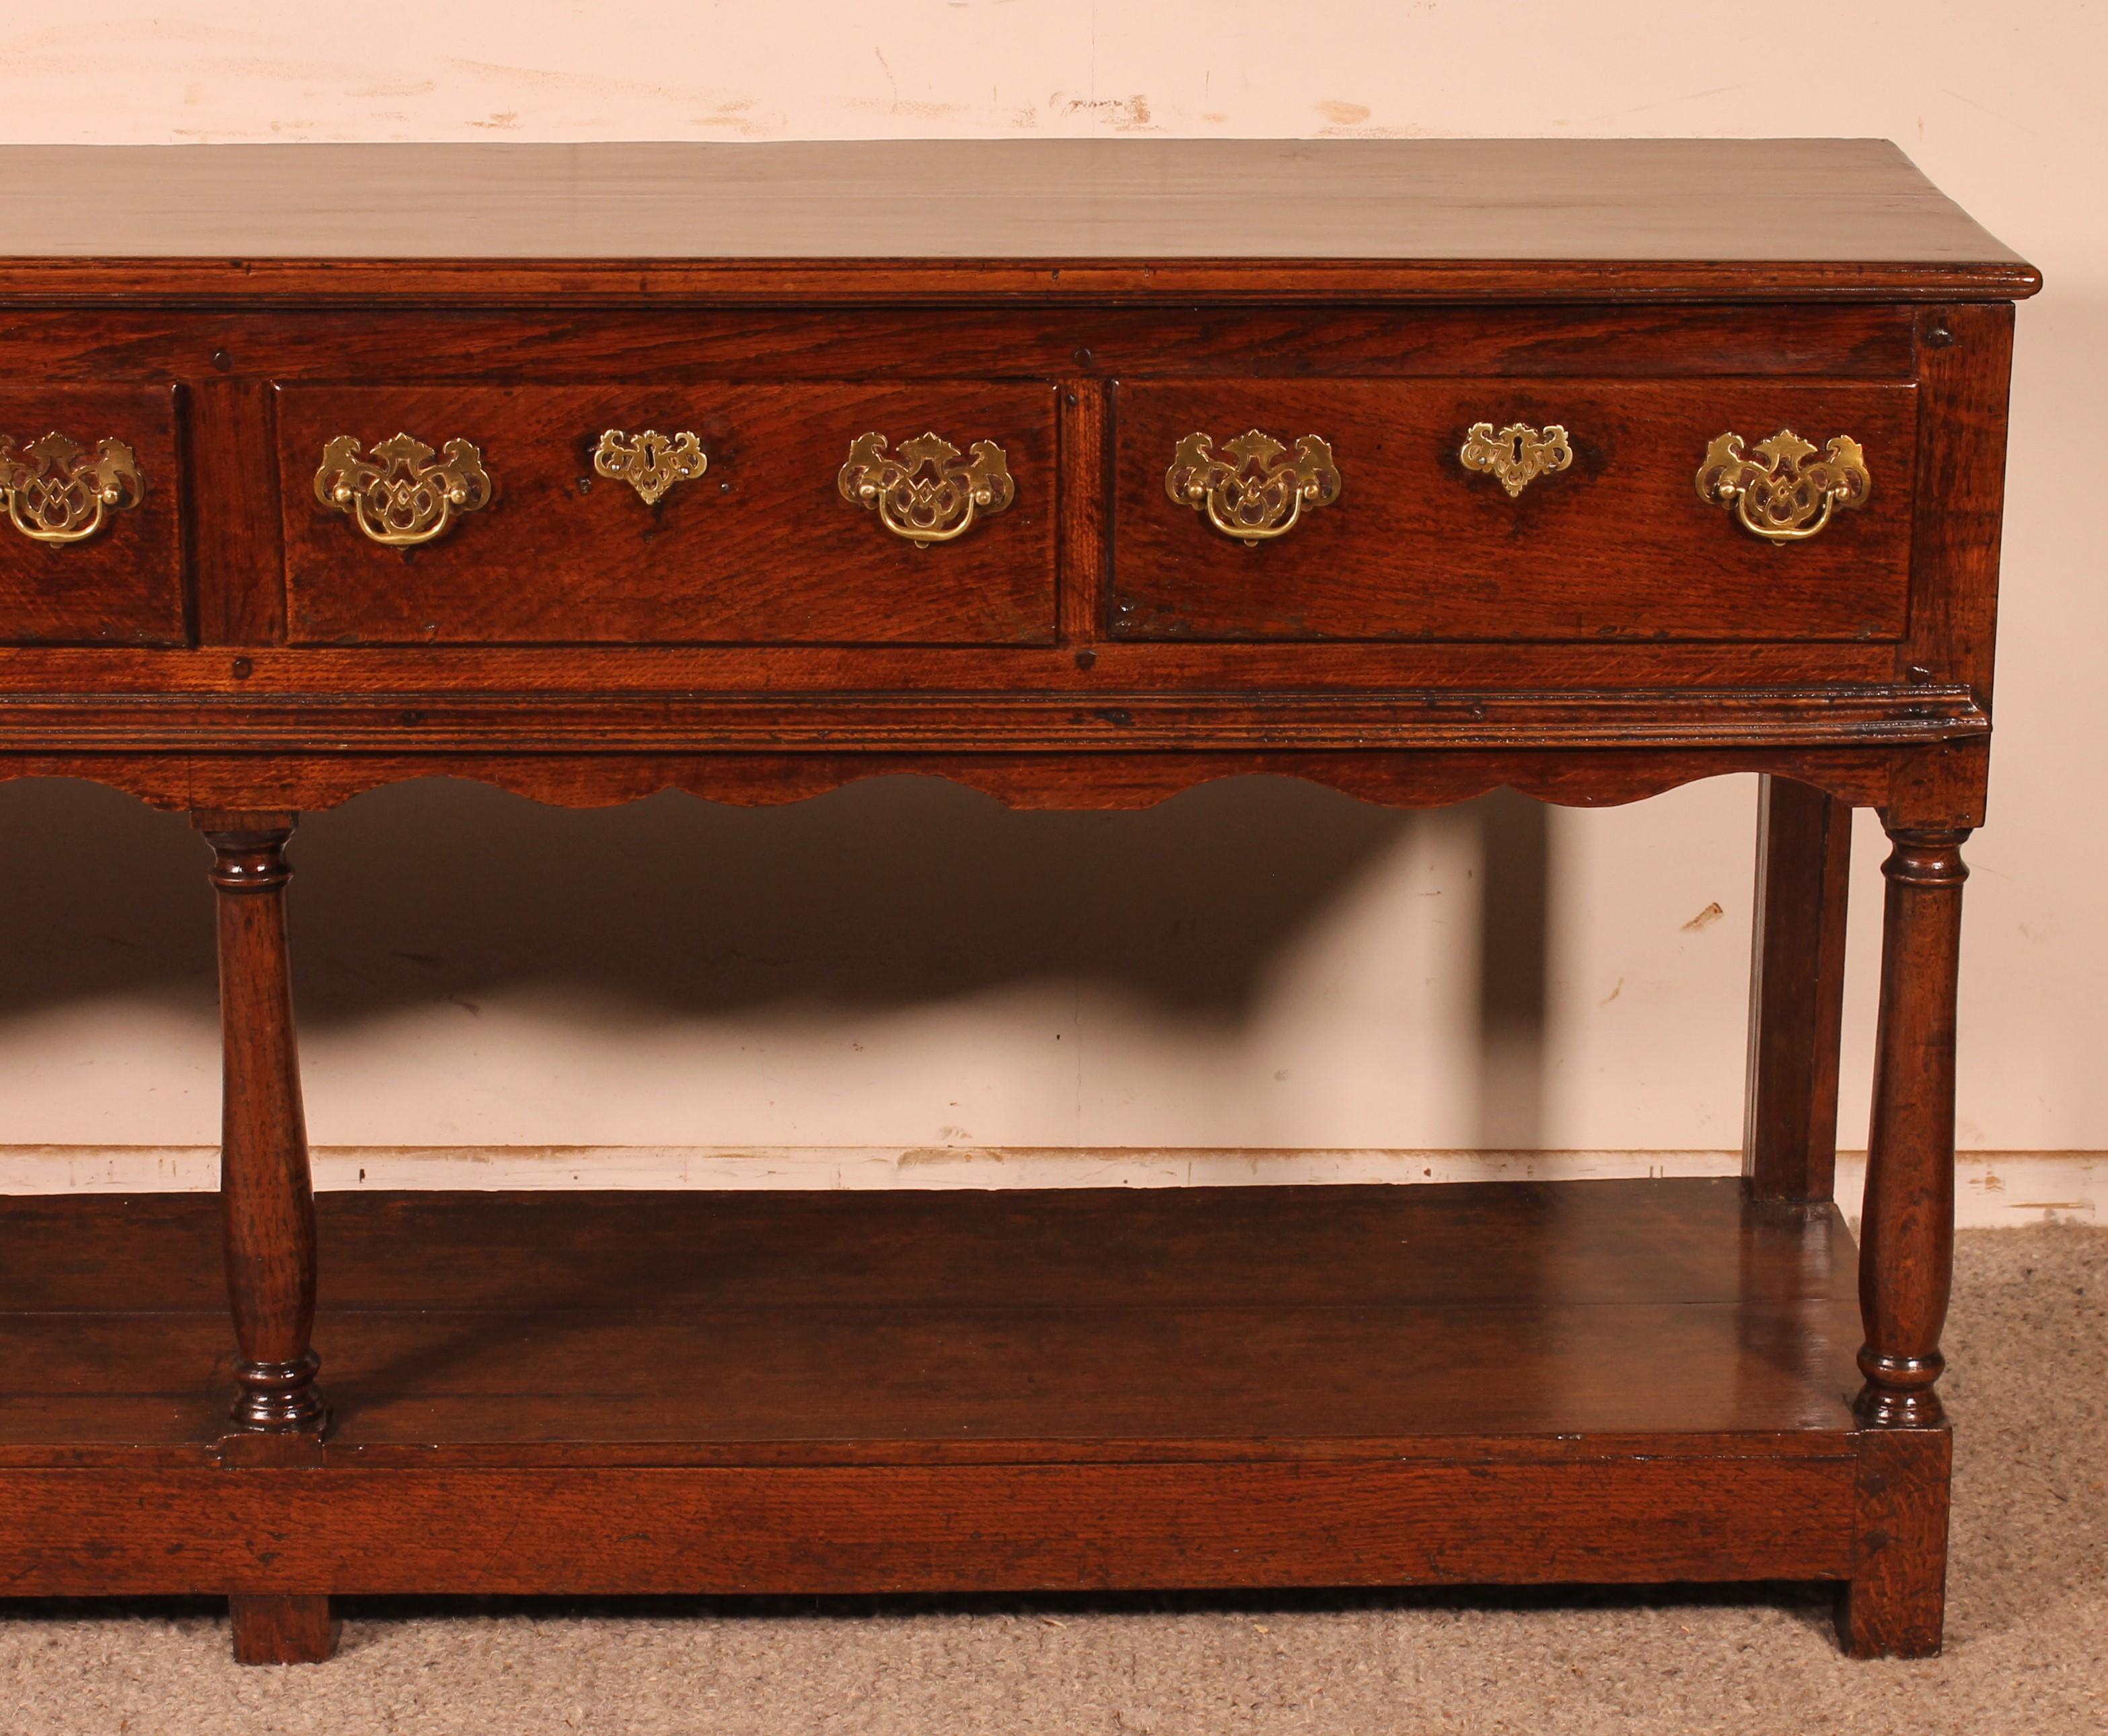 Superb console called dresser in oak from Wales from the 18th century

rare console which is composed of 4 drawers which is unusual
beautiful model which is composed of two trays which allows to put objects and gives a beautiful line
decorative